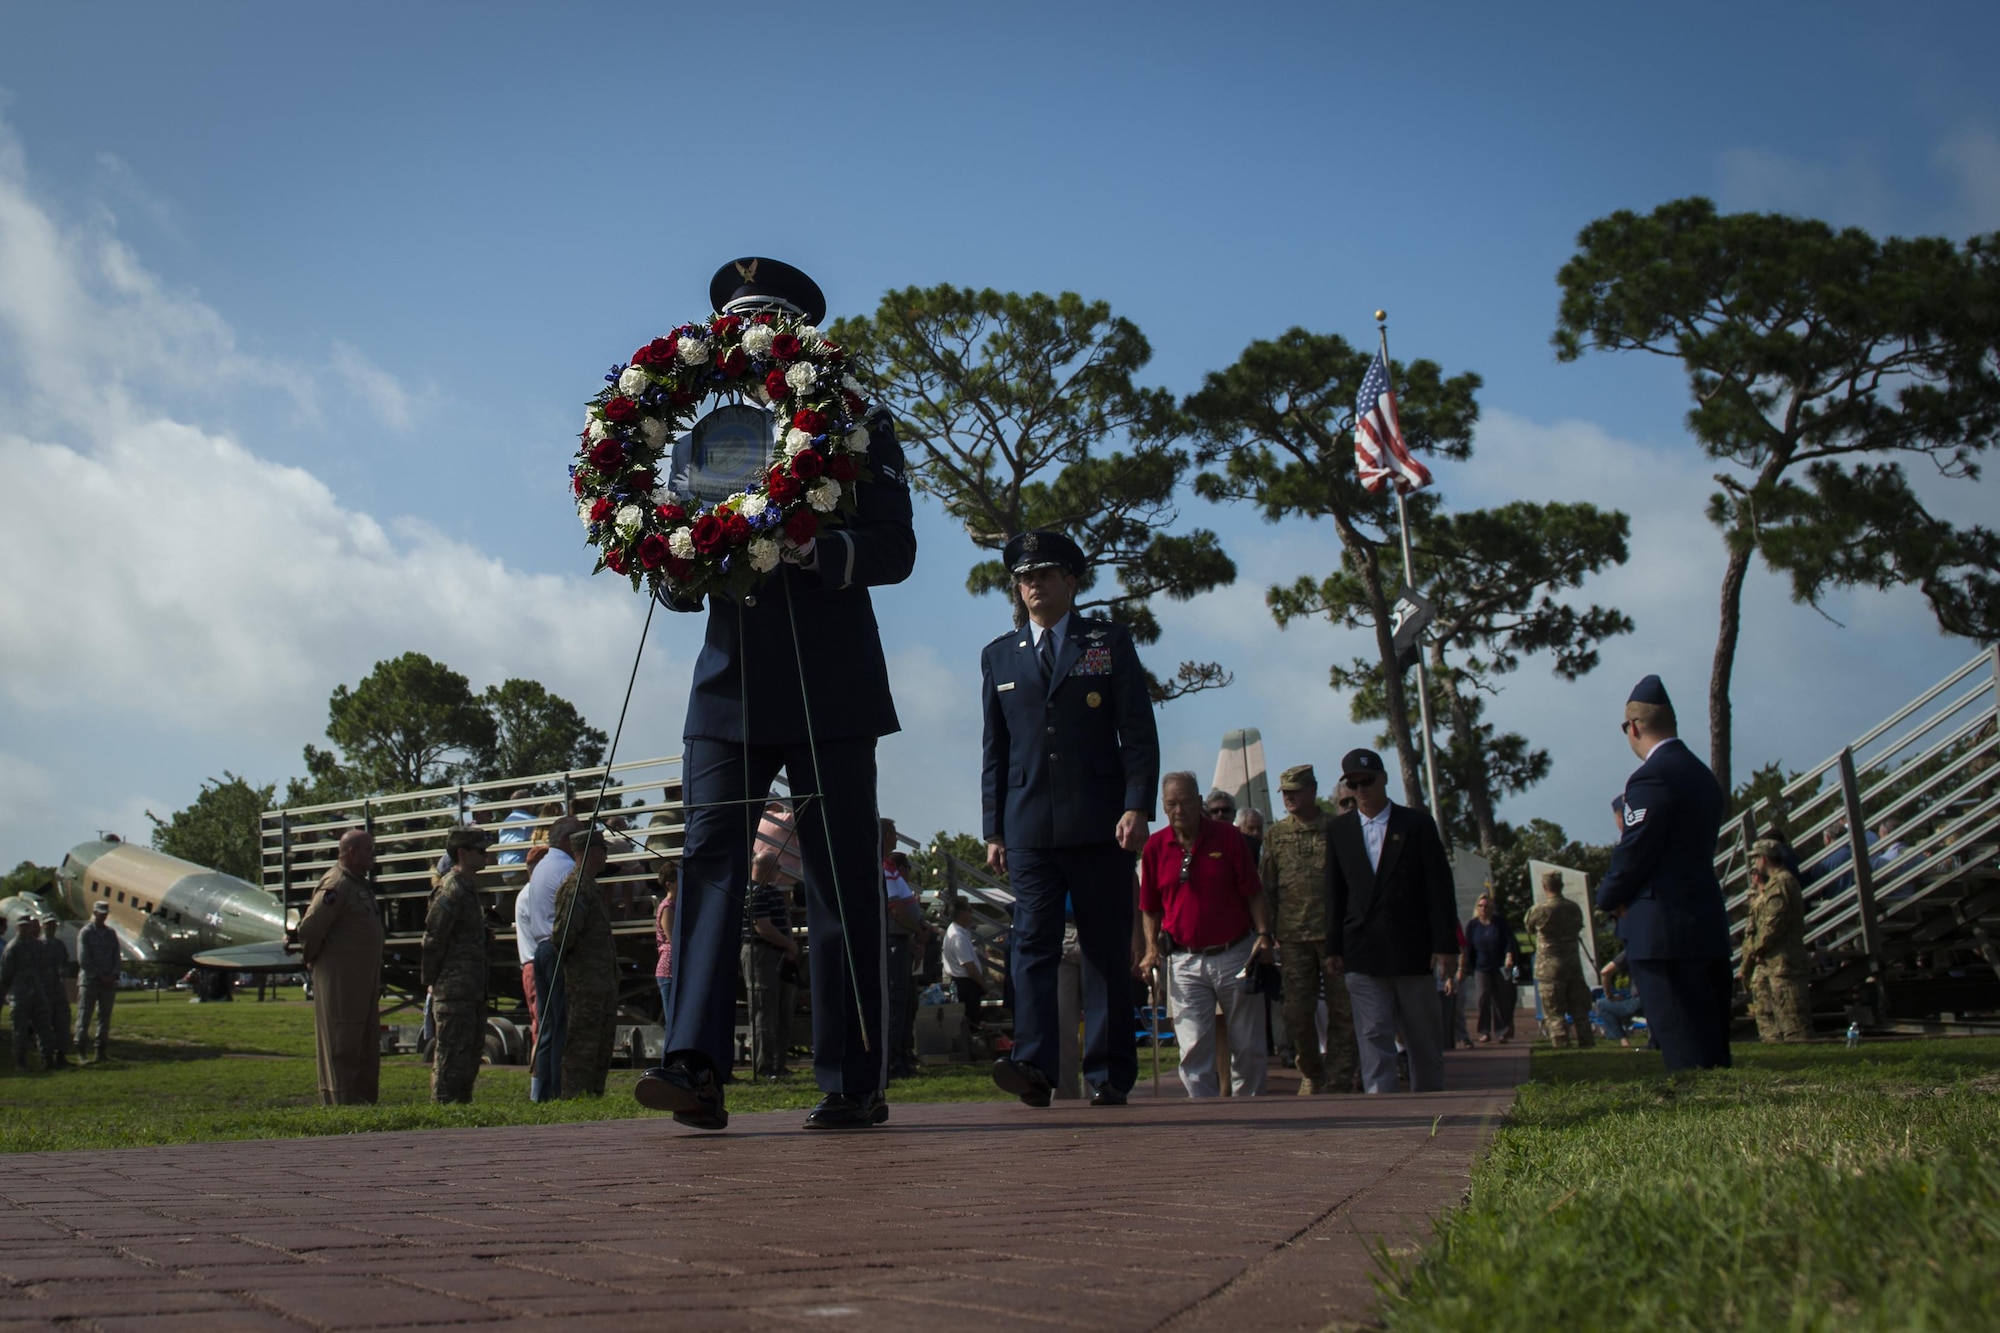 A member of the Hurlburt Field Honor Guard carries a wreath during the Operation Eagle Claw memorial ceremony at Hurlburt Field, Fla., June 23, 2017. Operation Eagle Claw was an attempted hostage-rescue mission in 1980. The mission resulted in five, 8th Special Operations Squadron Airmen and three Marines sacrificing their lives when two of the involved aircraft collided at the Desert One staging site. (U.S. Air Force photo by Airman 1st Class Joseph Pick)